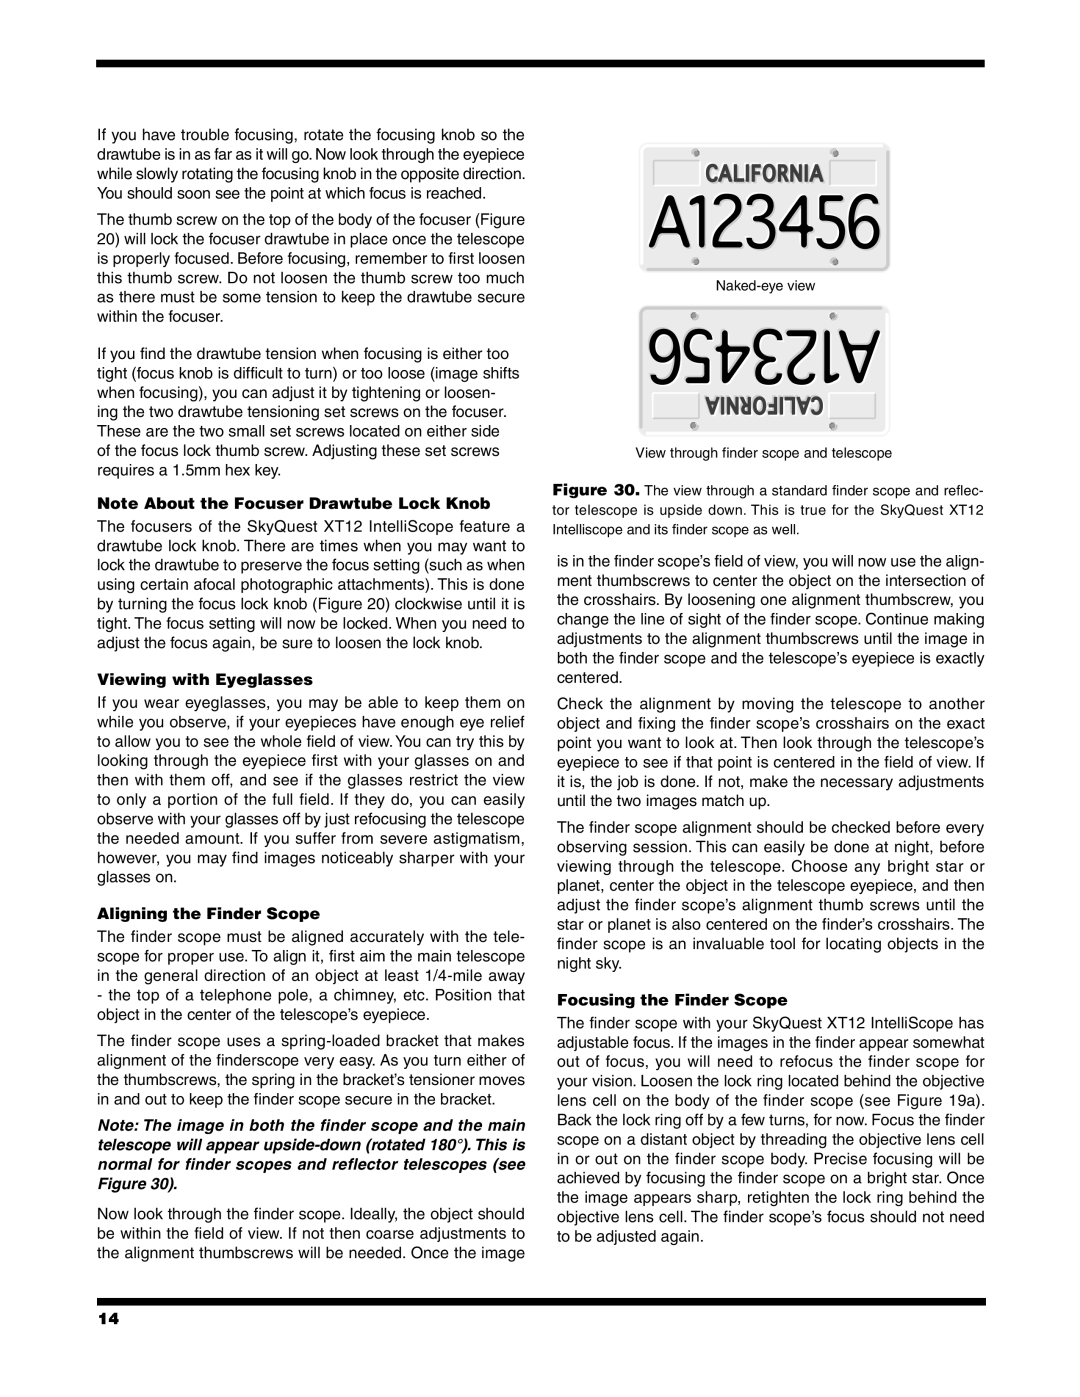 Orion XT12 instruction manual Note About the Focuser Drawtube Lock Knob, Viewing with Eyeglasses, Aligning the Finder Scope 